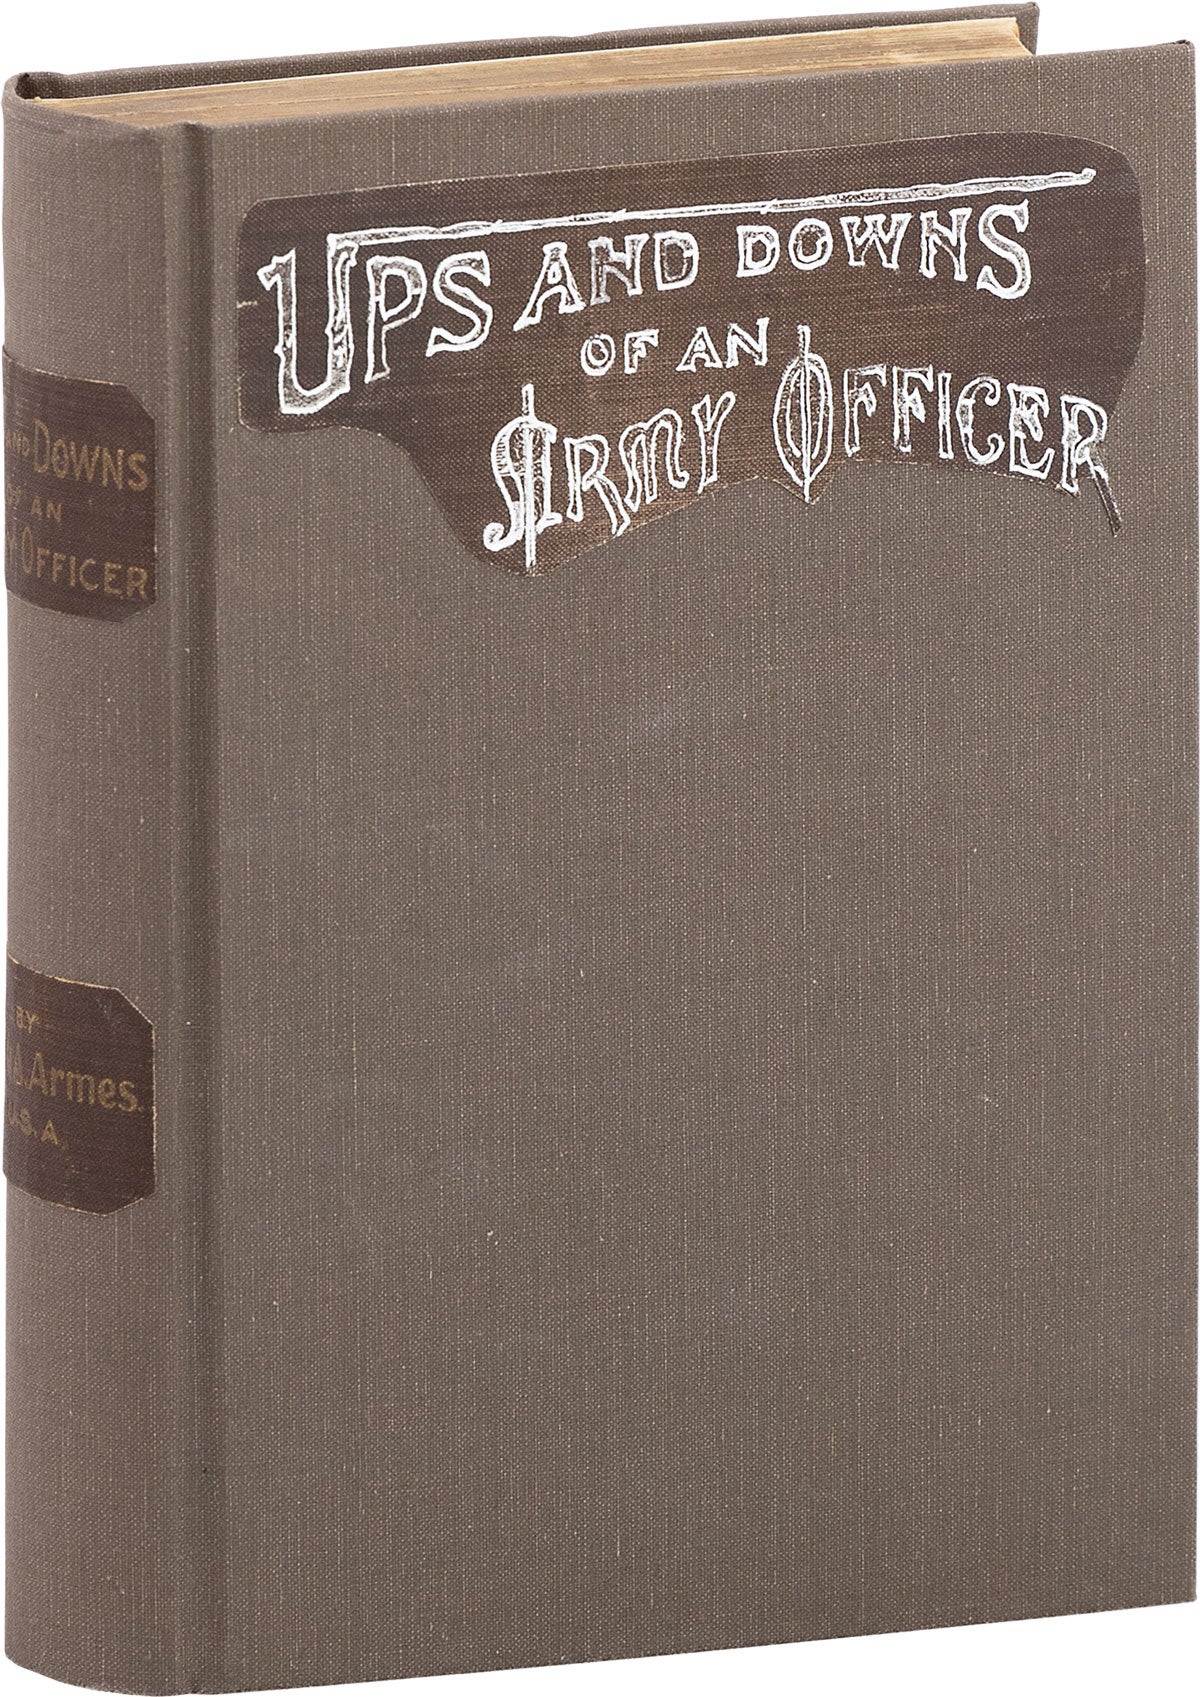 [Item #80763] Ups and Downs of An Army Officer. MILITARY, Col. George A. ARMES.